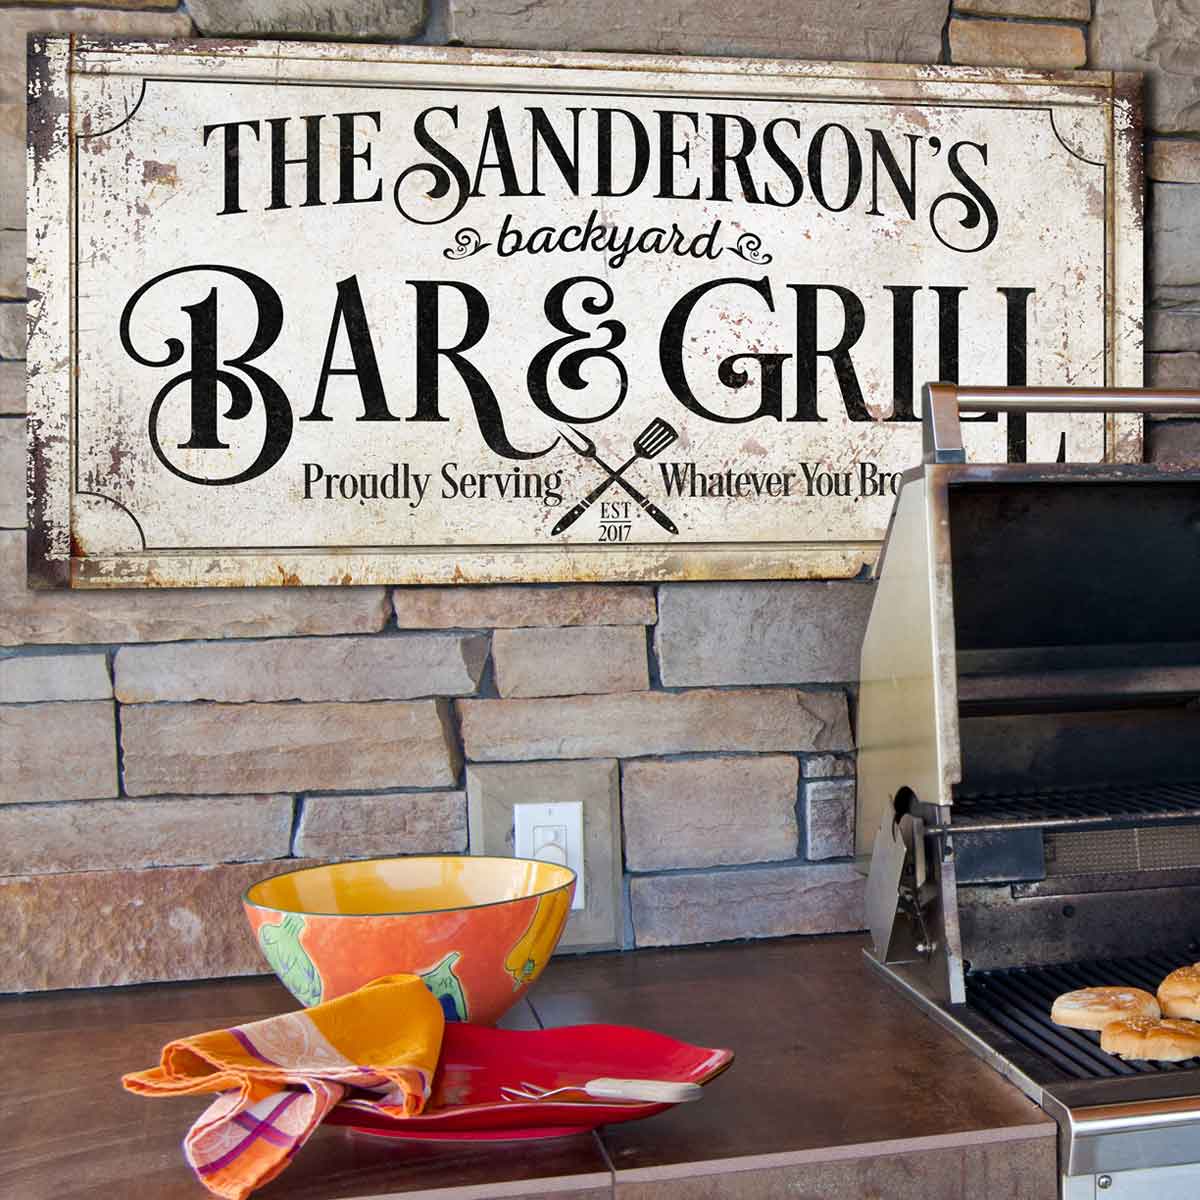 Backyard Bar and Grill Sign with distressed faux fram and the words [family name] Backyard Bar and Grill, proudly serving whatever you brought.